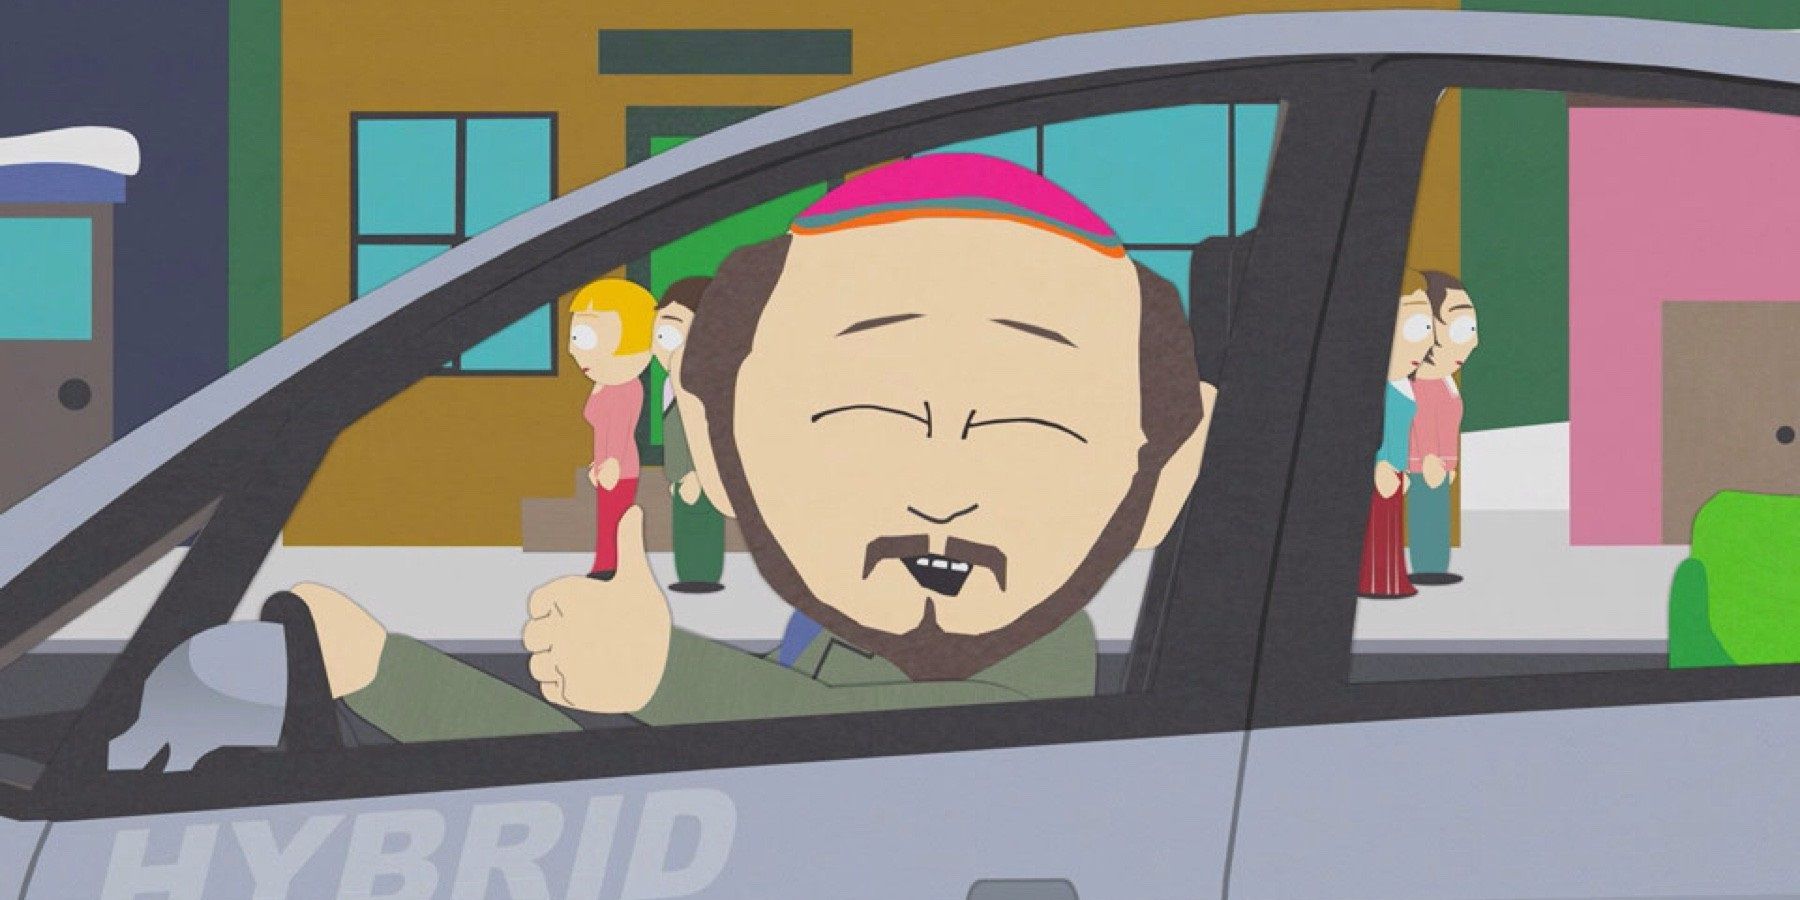 Gerald drives an electric car in South Park